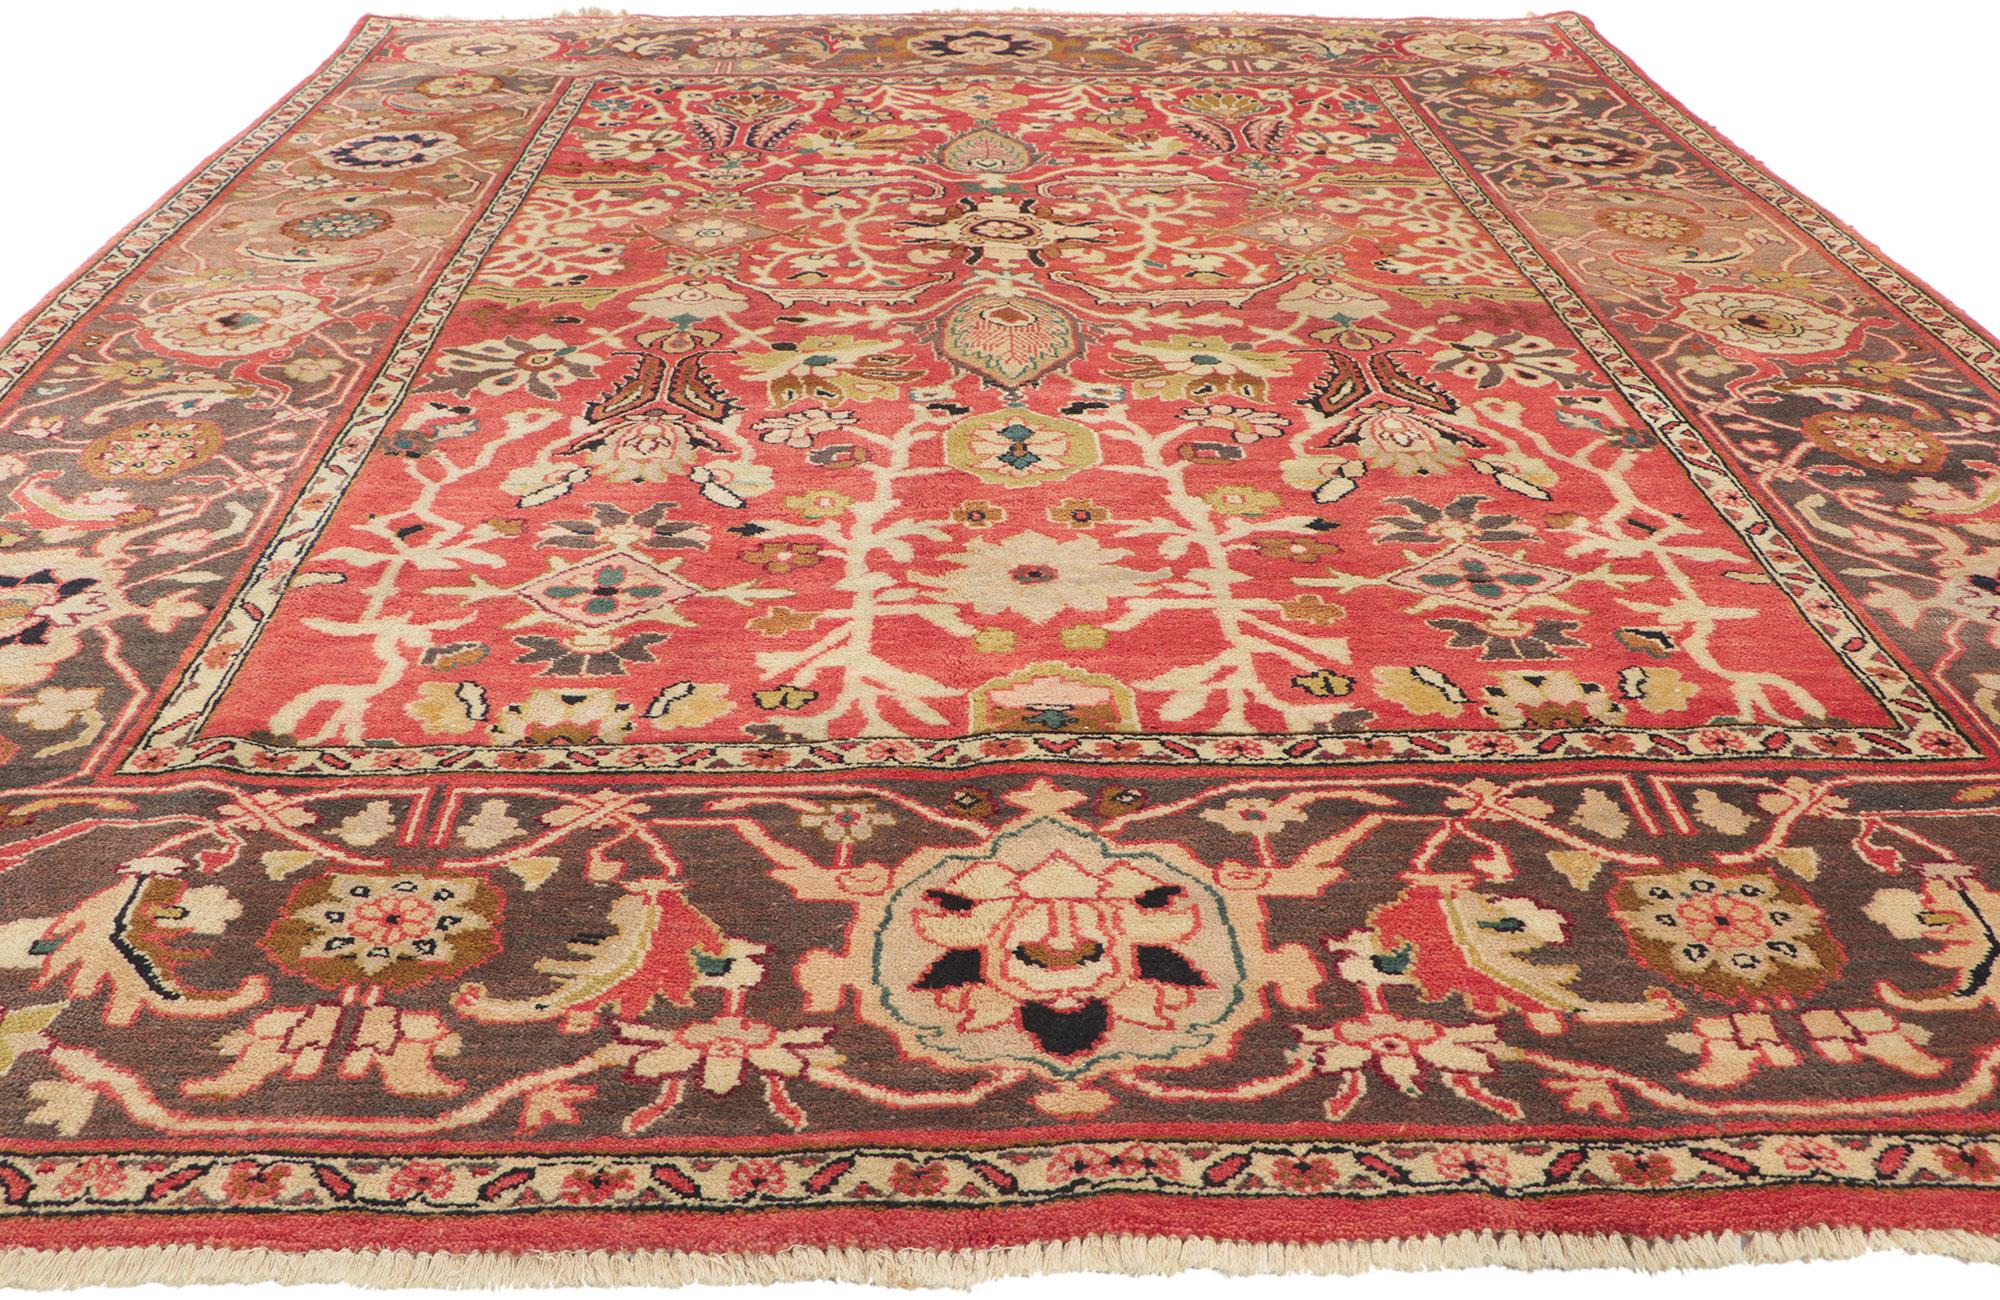 Rustic Vintage Indian Mahal Rug with Warm Earth-Tone Colors For Sale